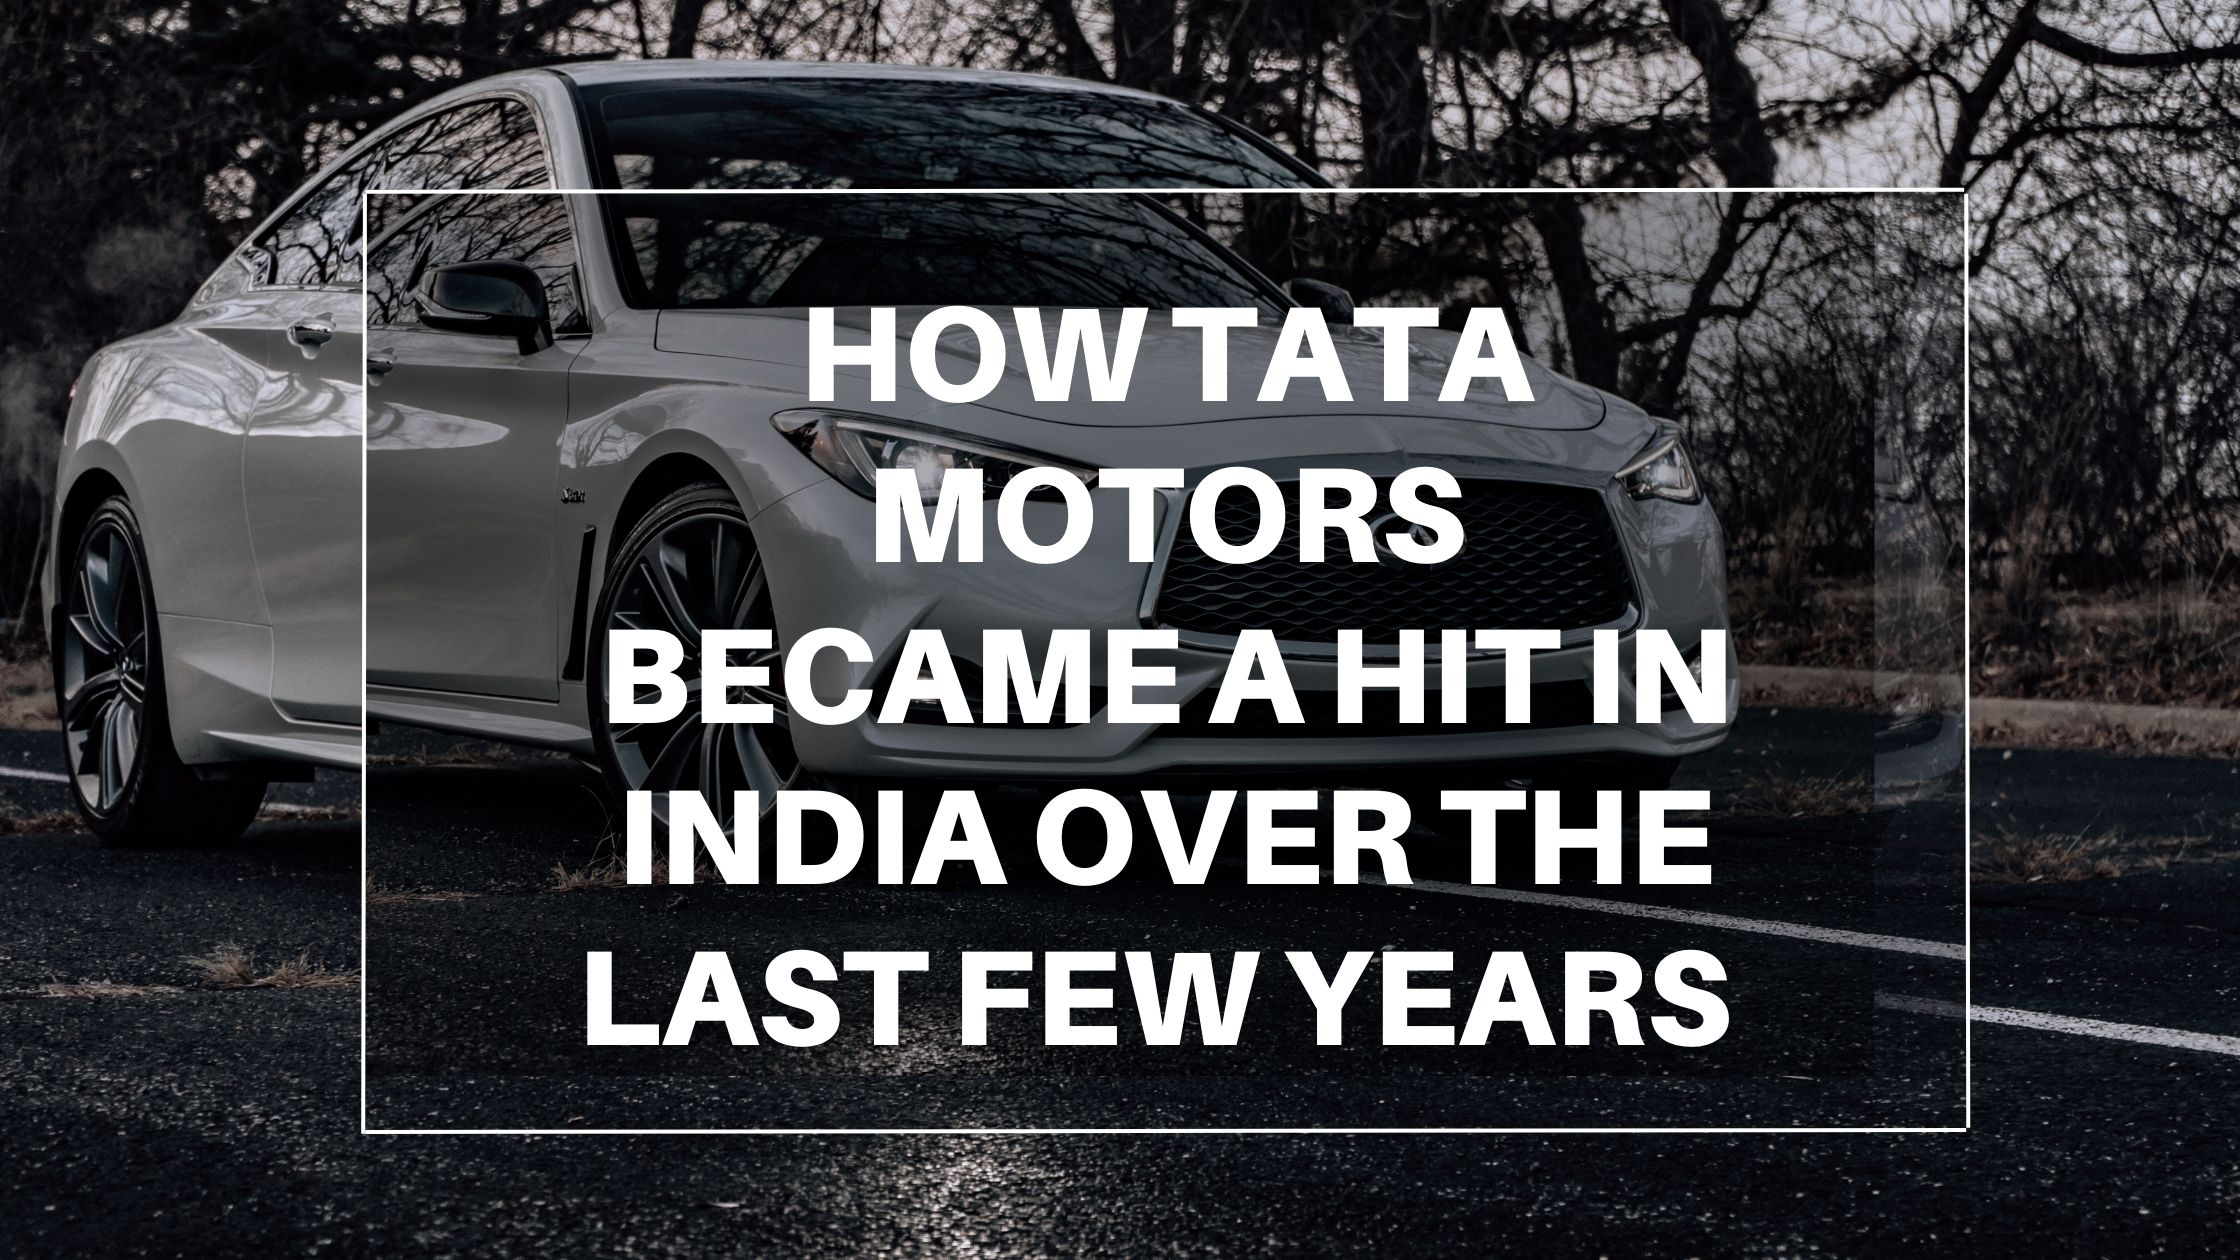 How Tata Motors Became a hit in India over the last few years